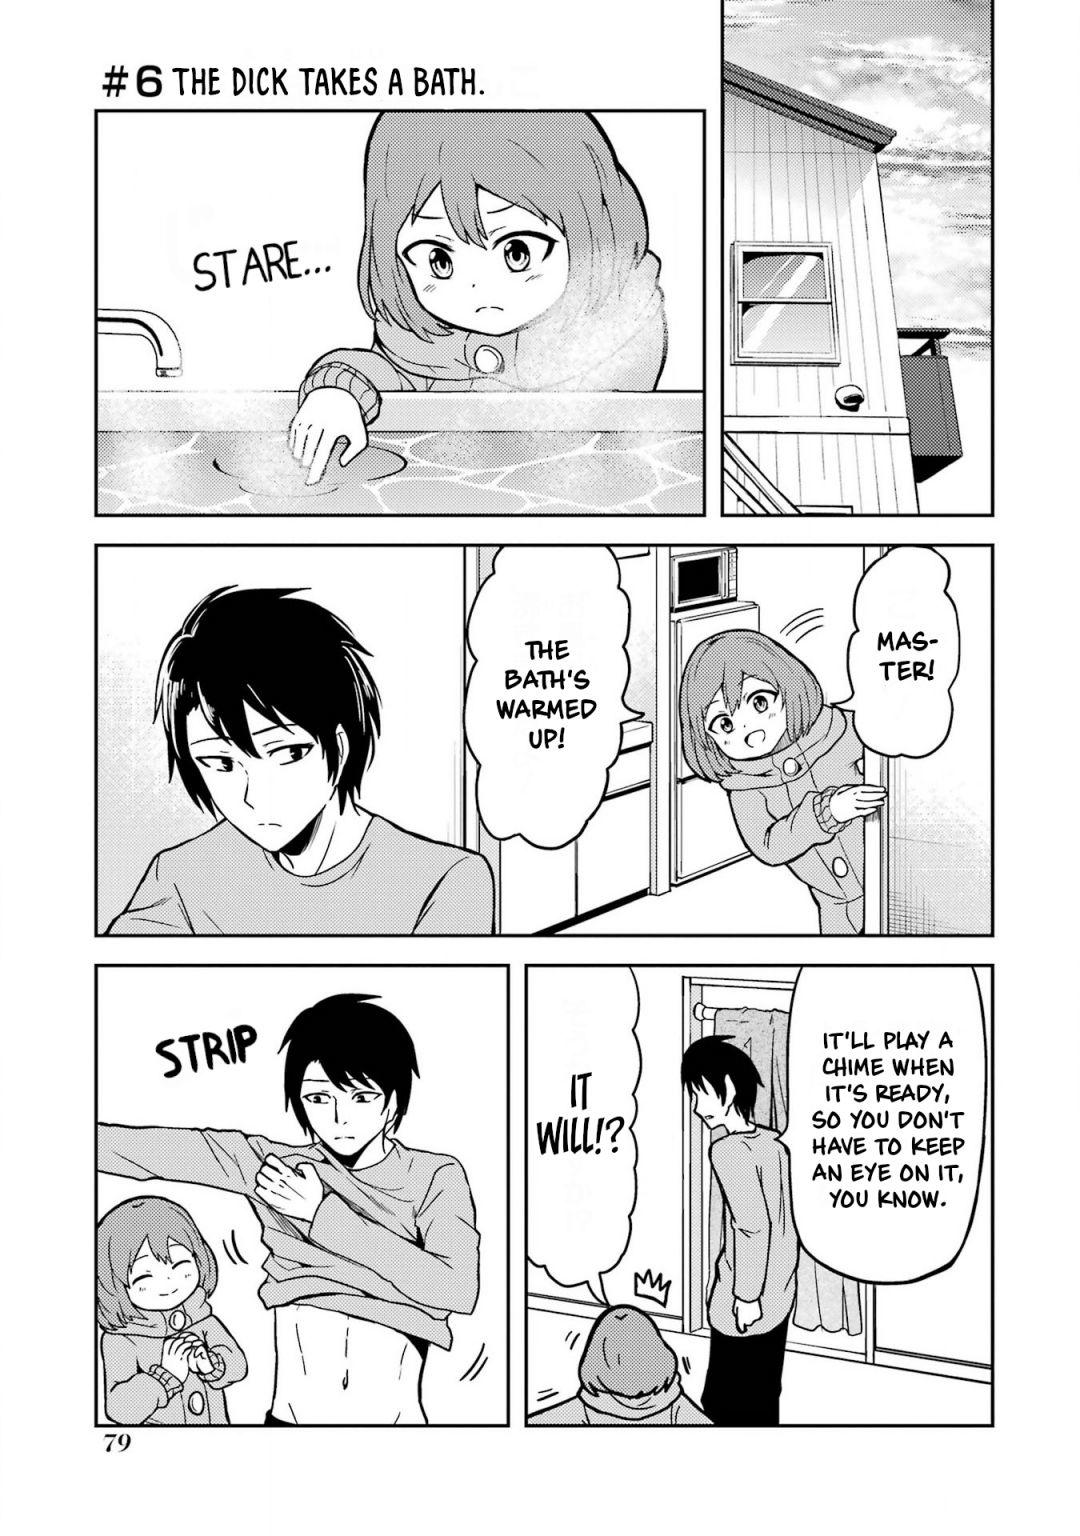 Read Turns Out My Dick Was A Cute Girl Chapter 6 On Mangakakalot